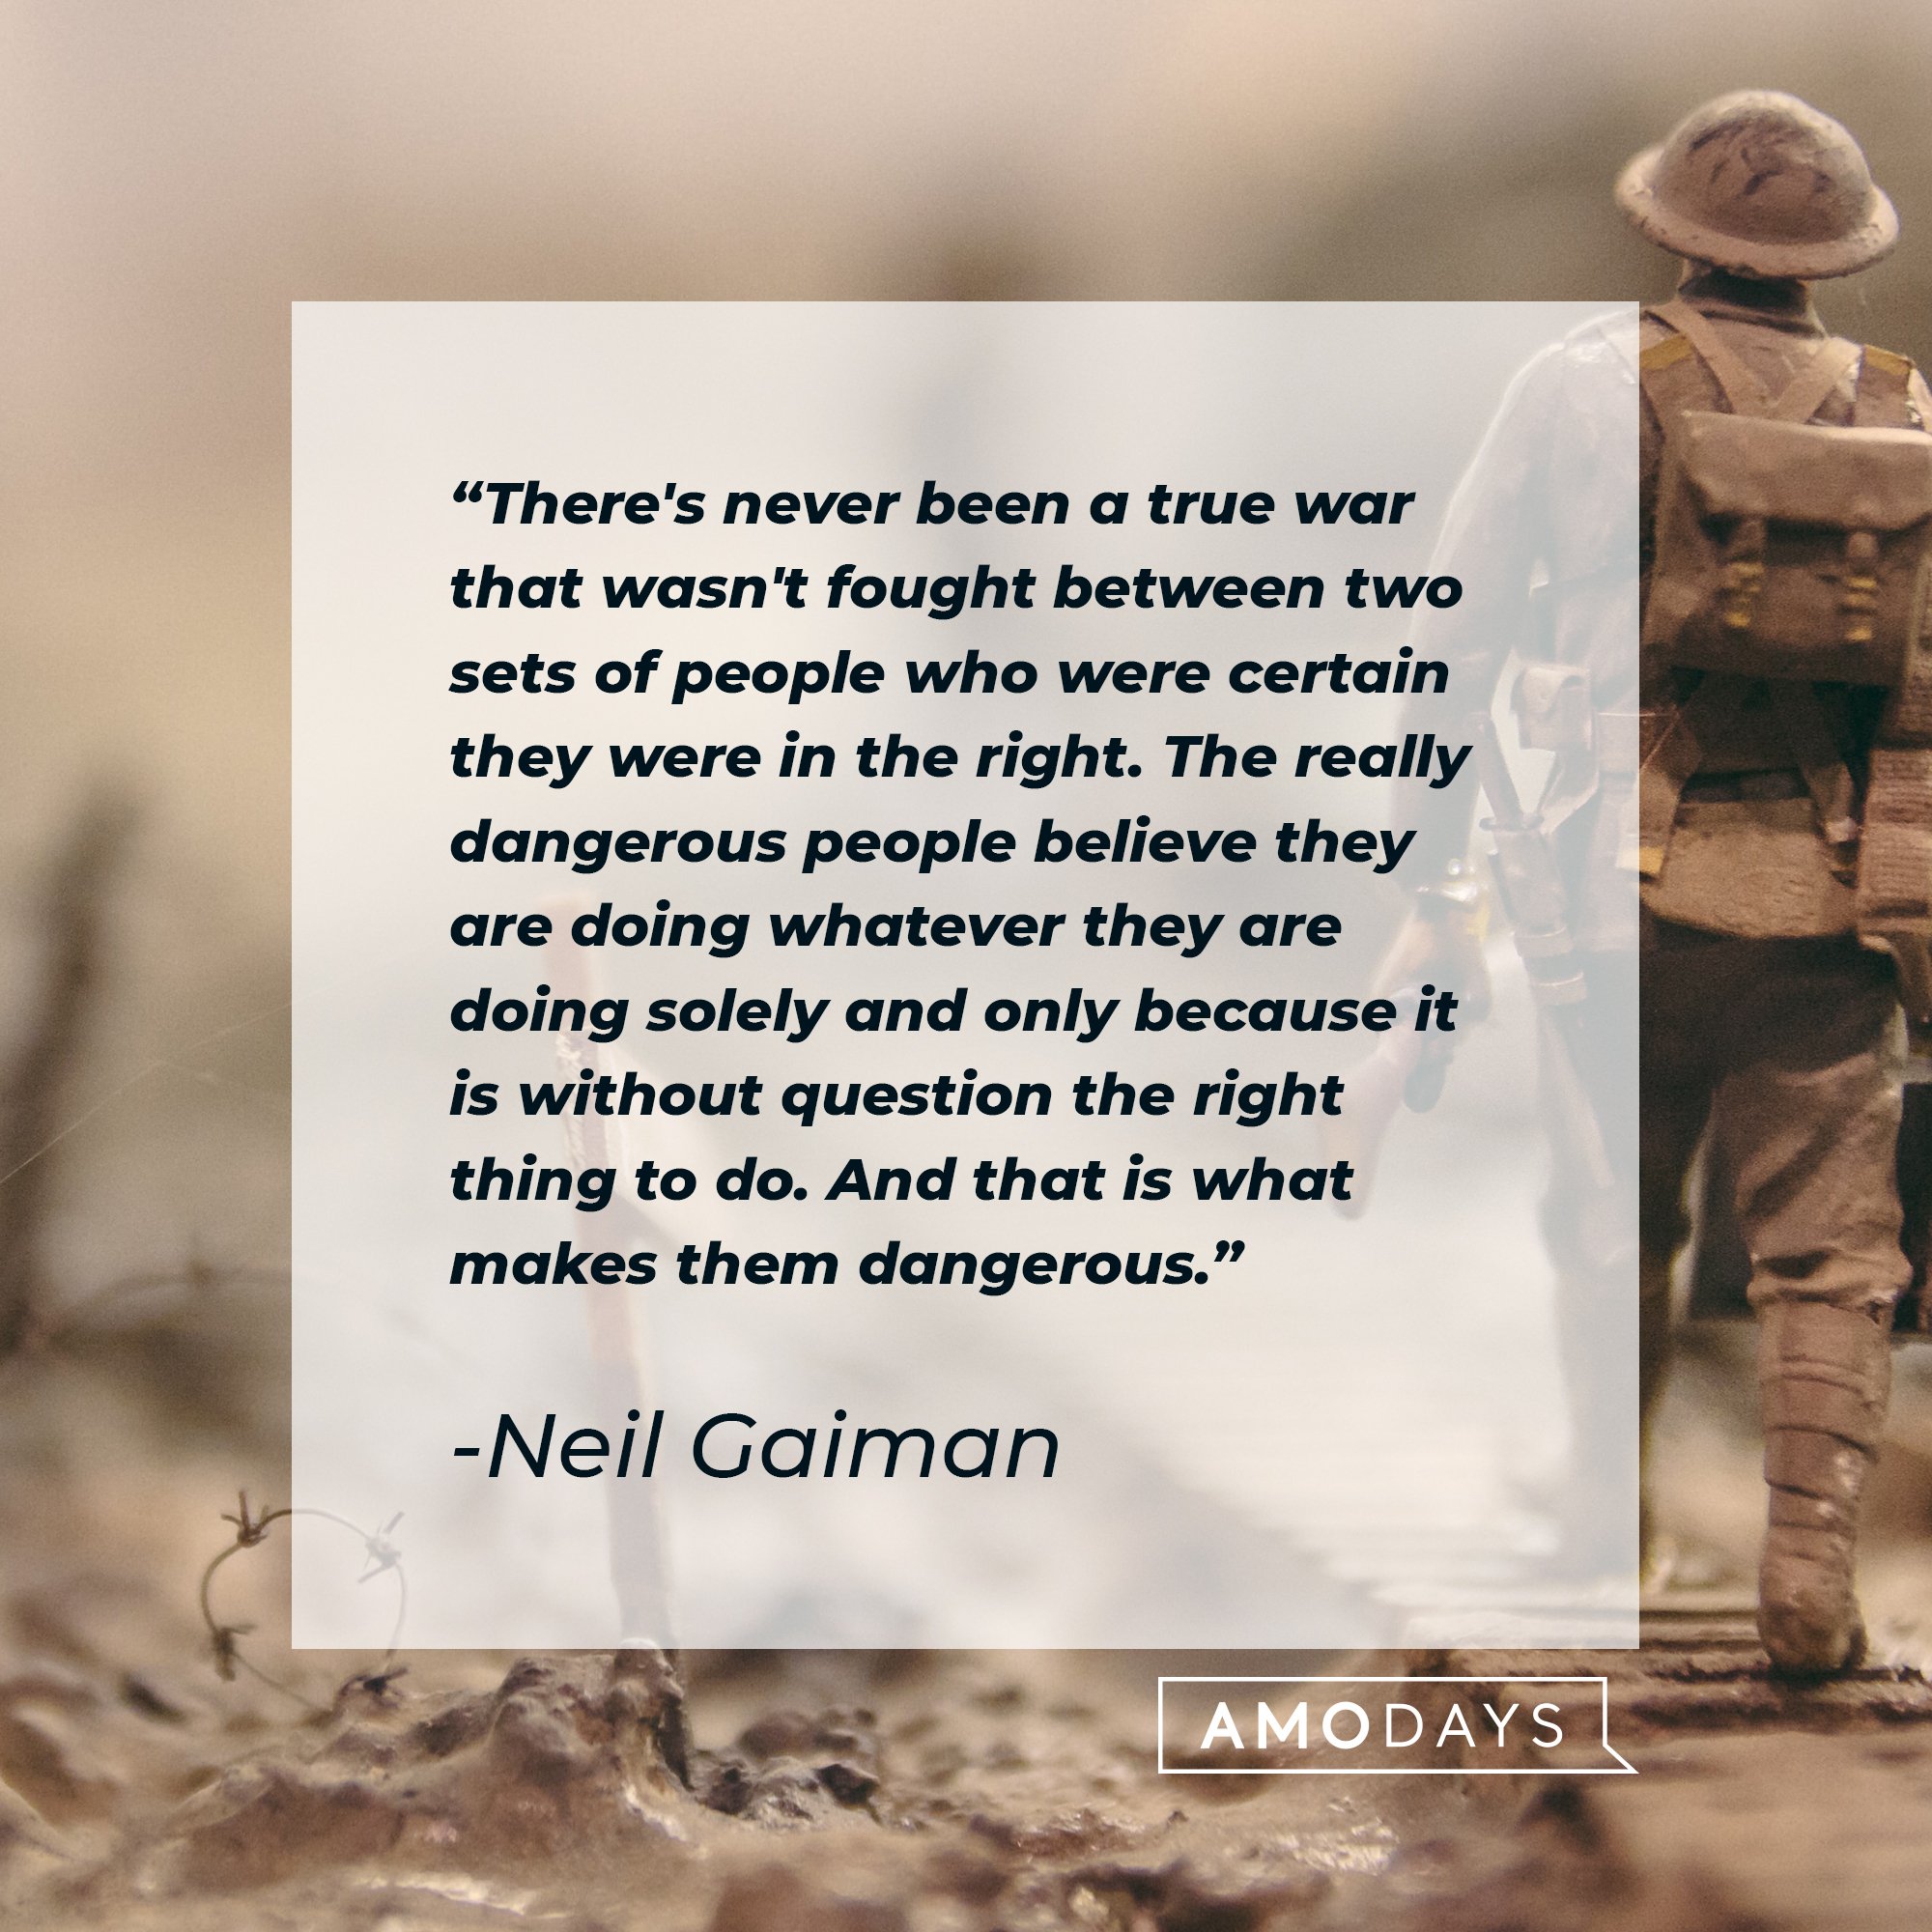  Neil Gaiman's quote: "There's never been a true war that wasn't fought between two sets of people who were certain they were in the right. The really dangerous people believe they are doing whatever they are doing solely and only because it is without question the right thing to do. And that is what makes them dangerous." | Image: AmoDays